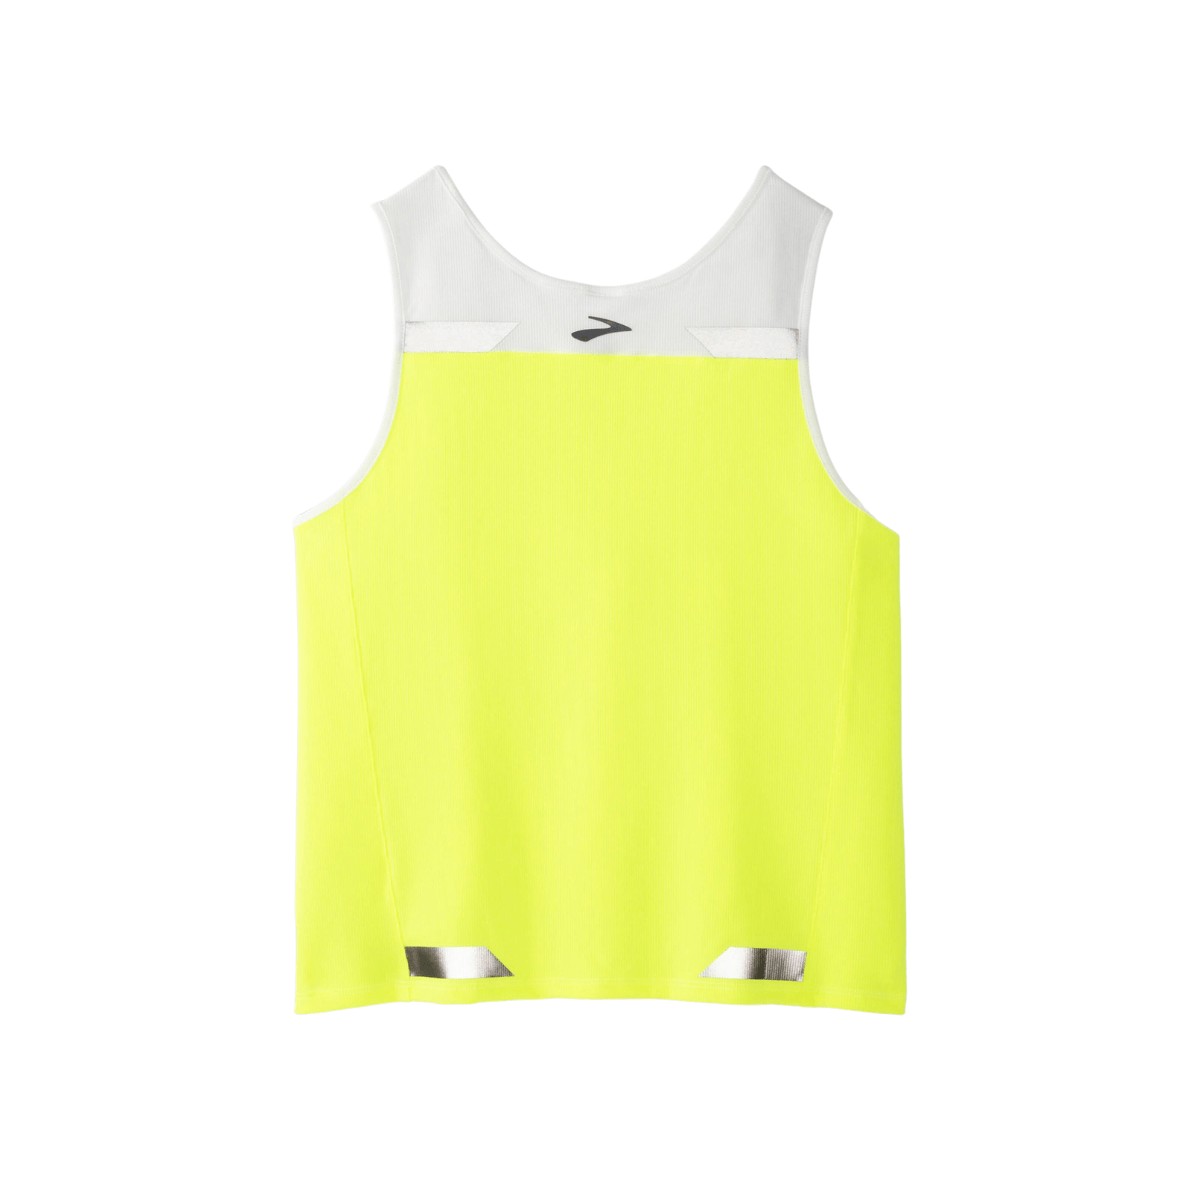 T-Shirt Brooks Back-to-Front Yellow White Women's, Size S